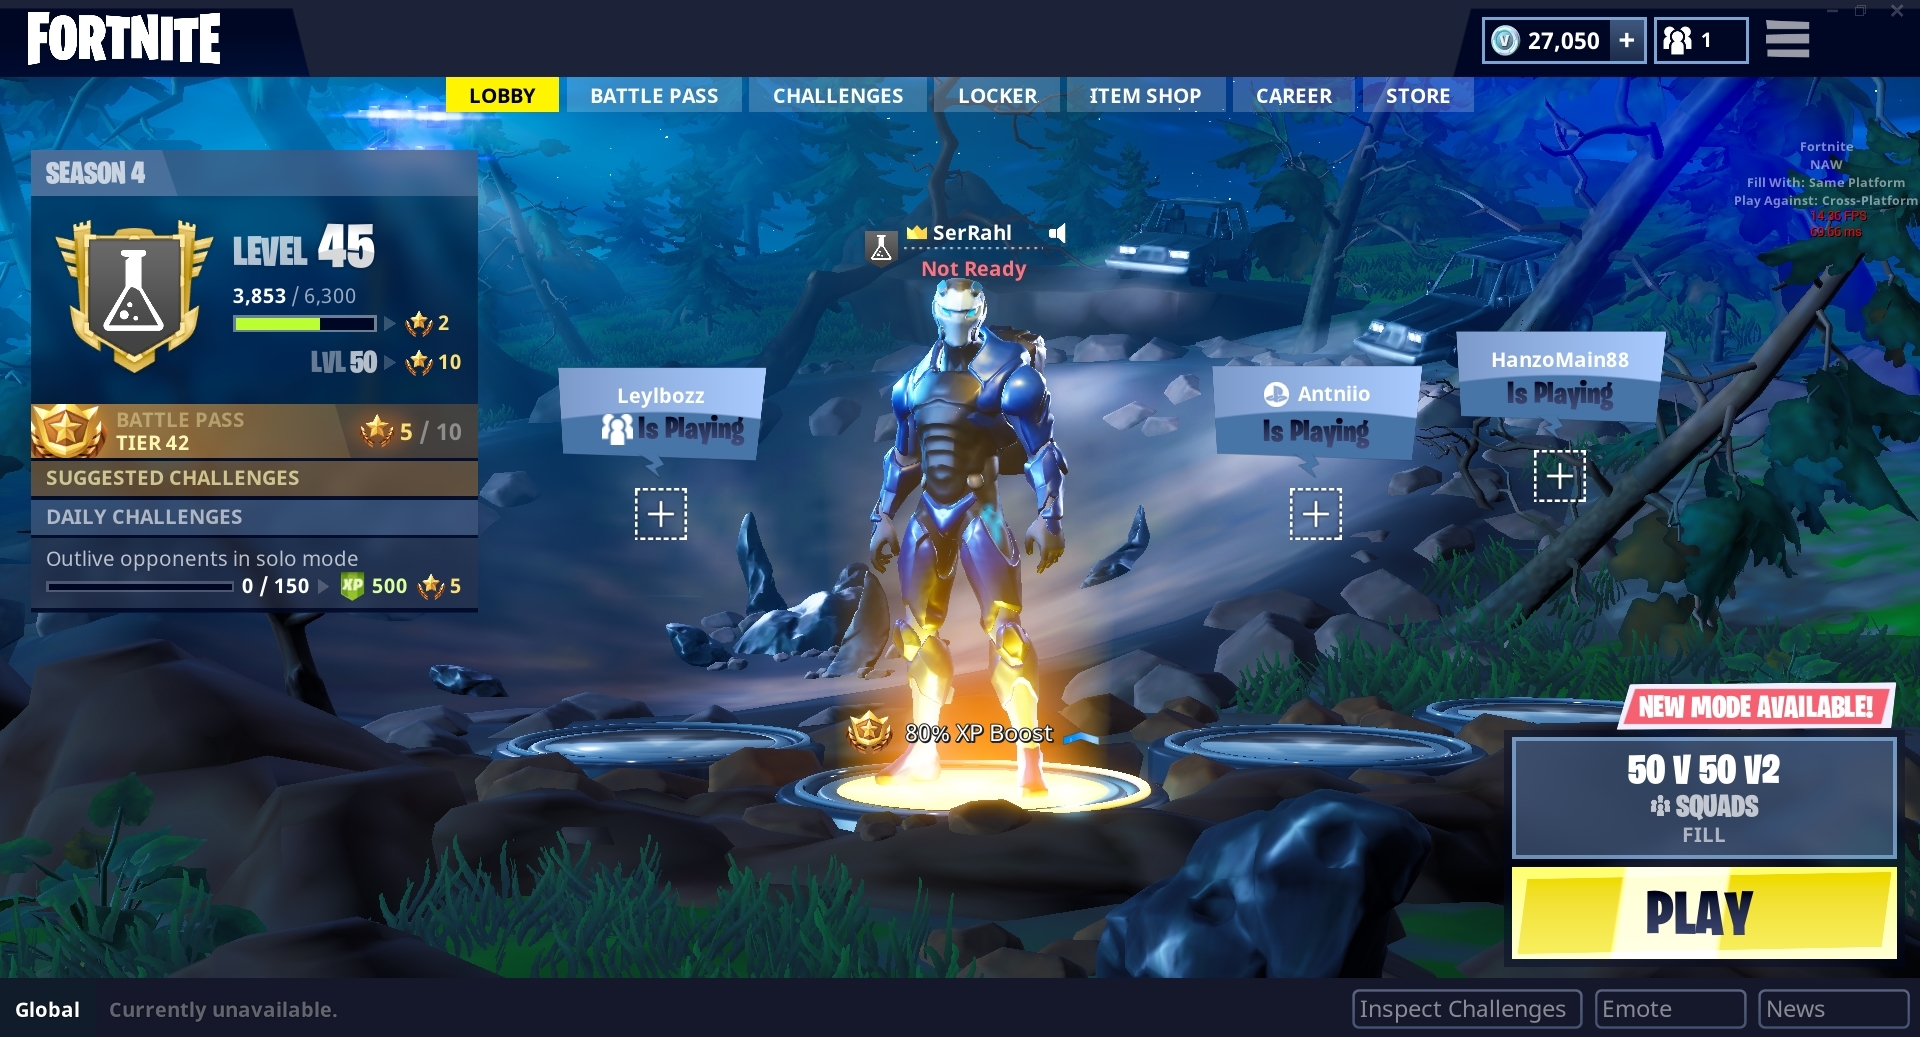 Selling Battle Pass 50 100 Wins Pc Fortnite Account With - img